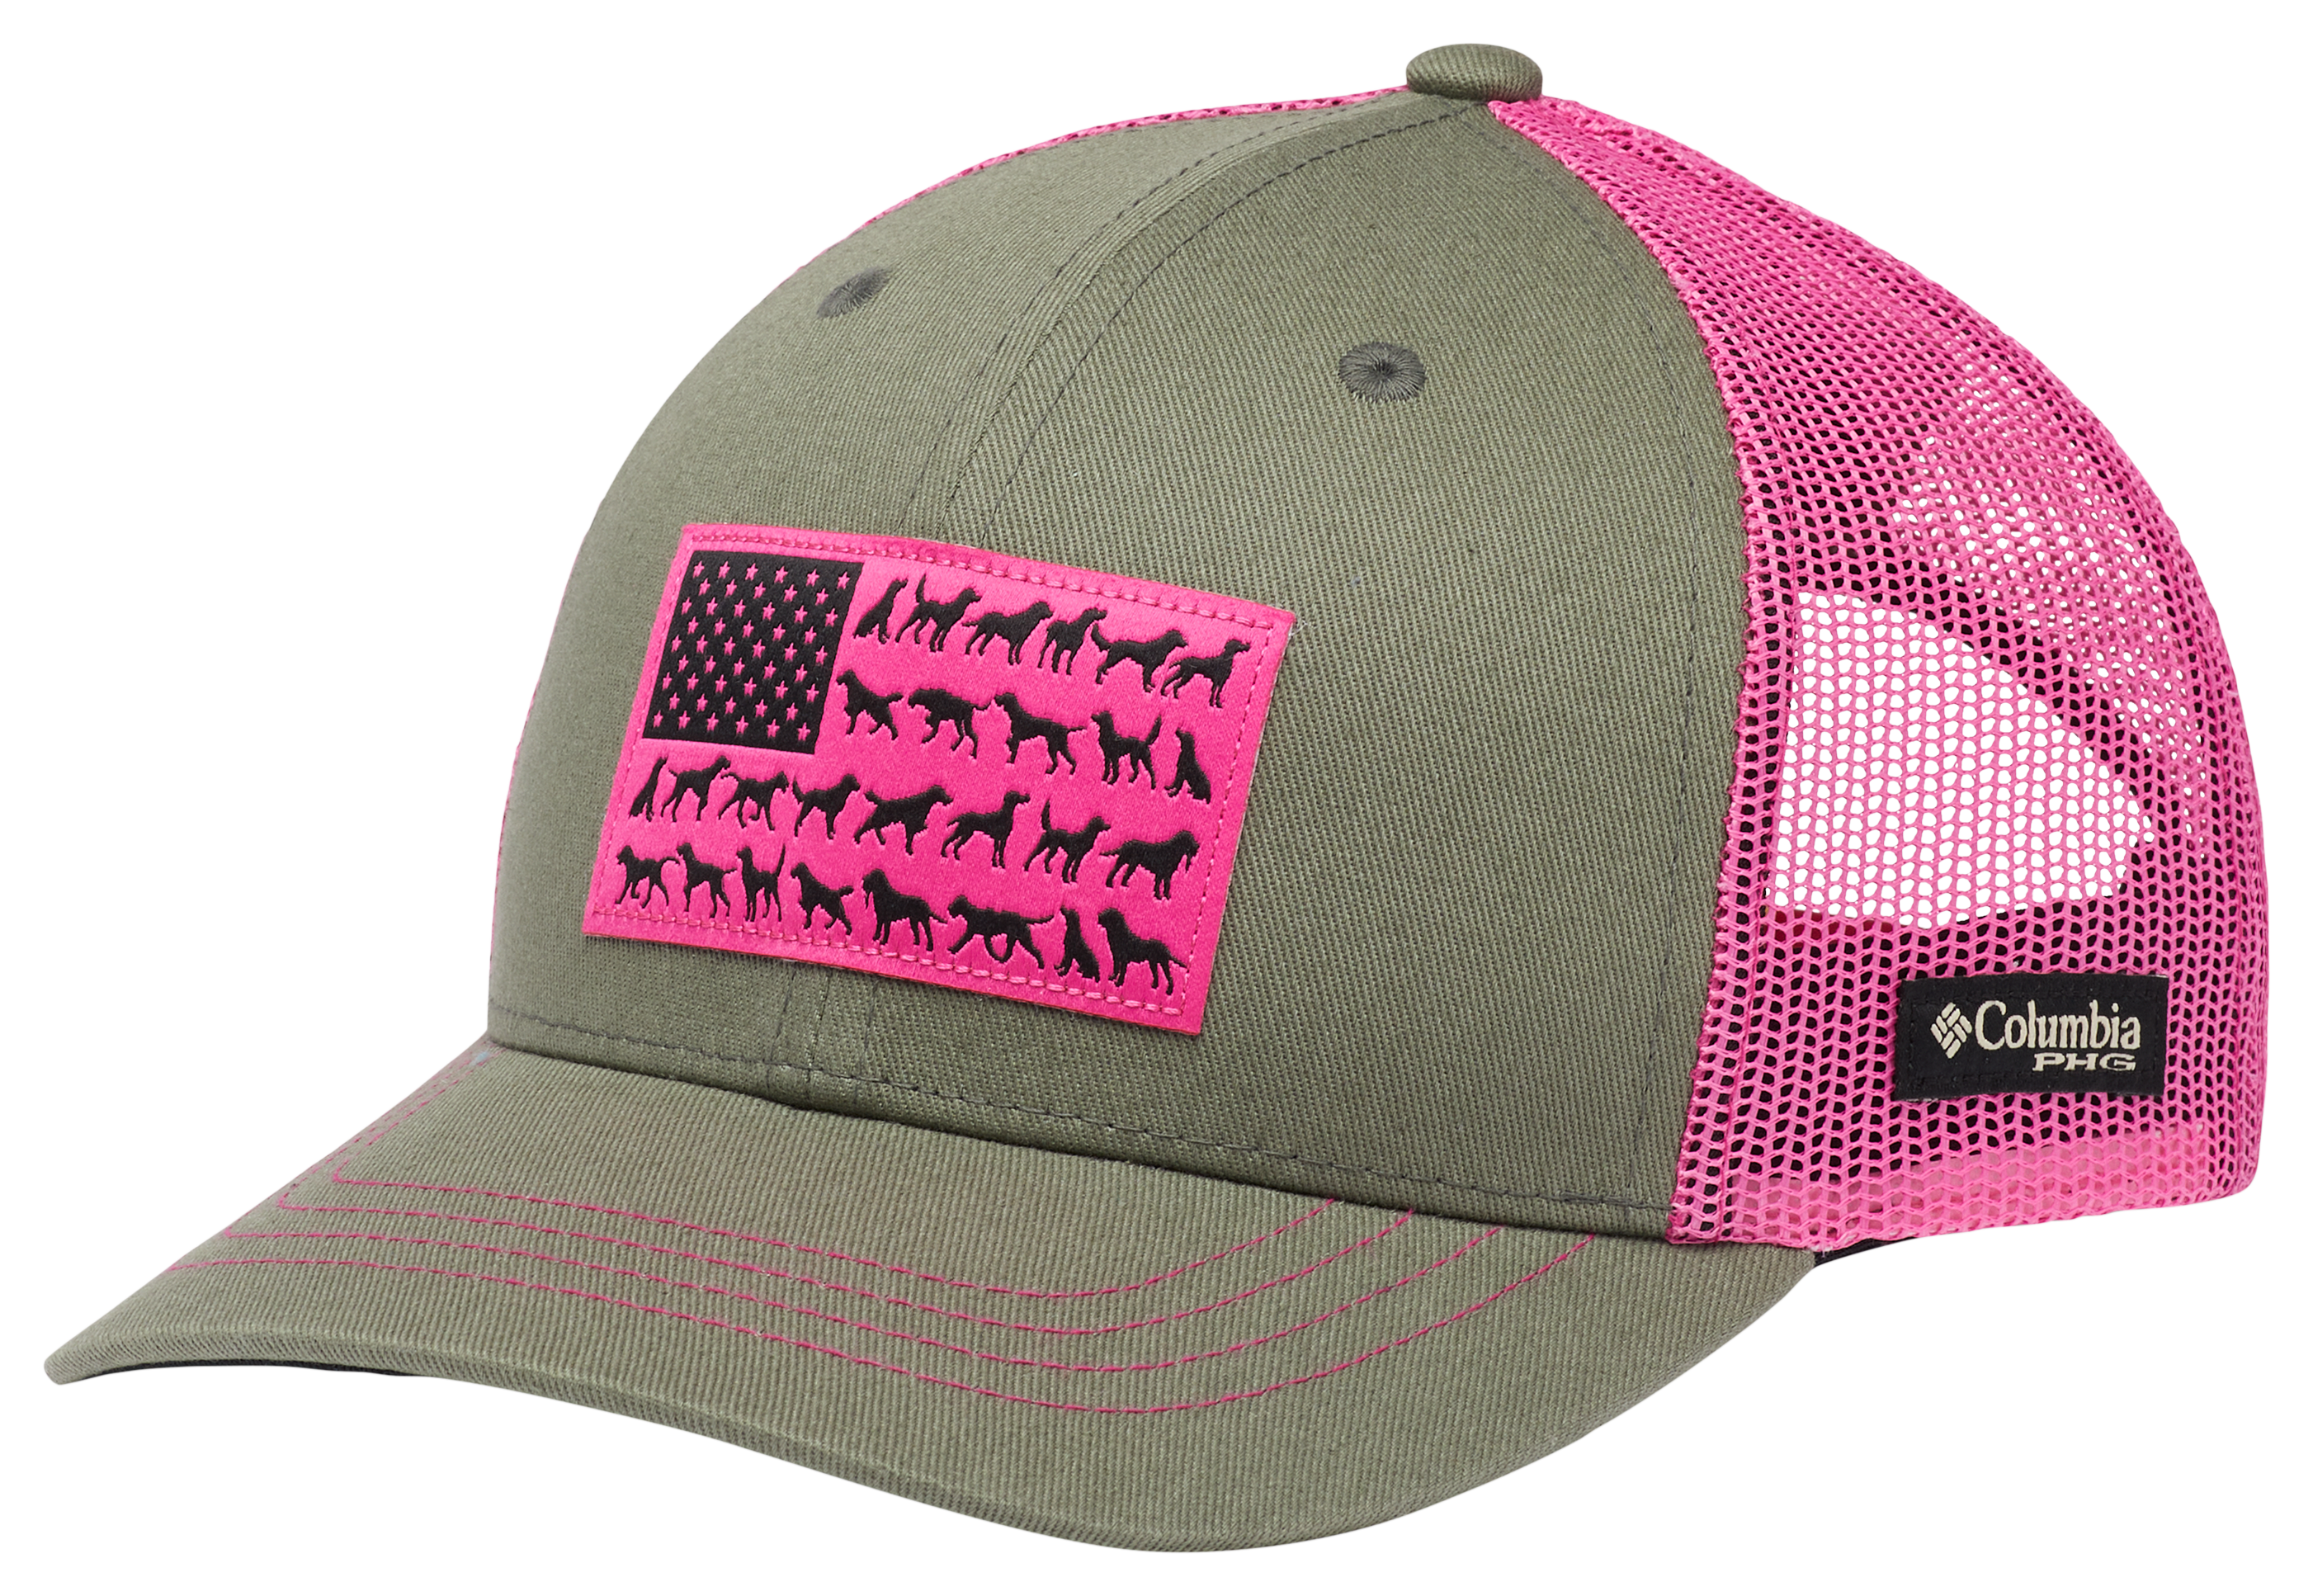 Bass Pro Shop Youth Green & Pink Fishing Ball Cap Hat Adjustable